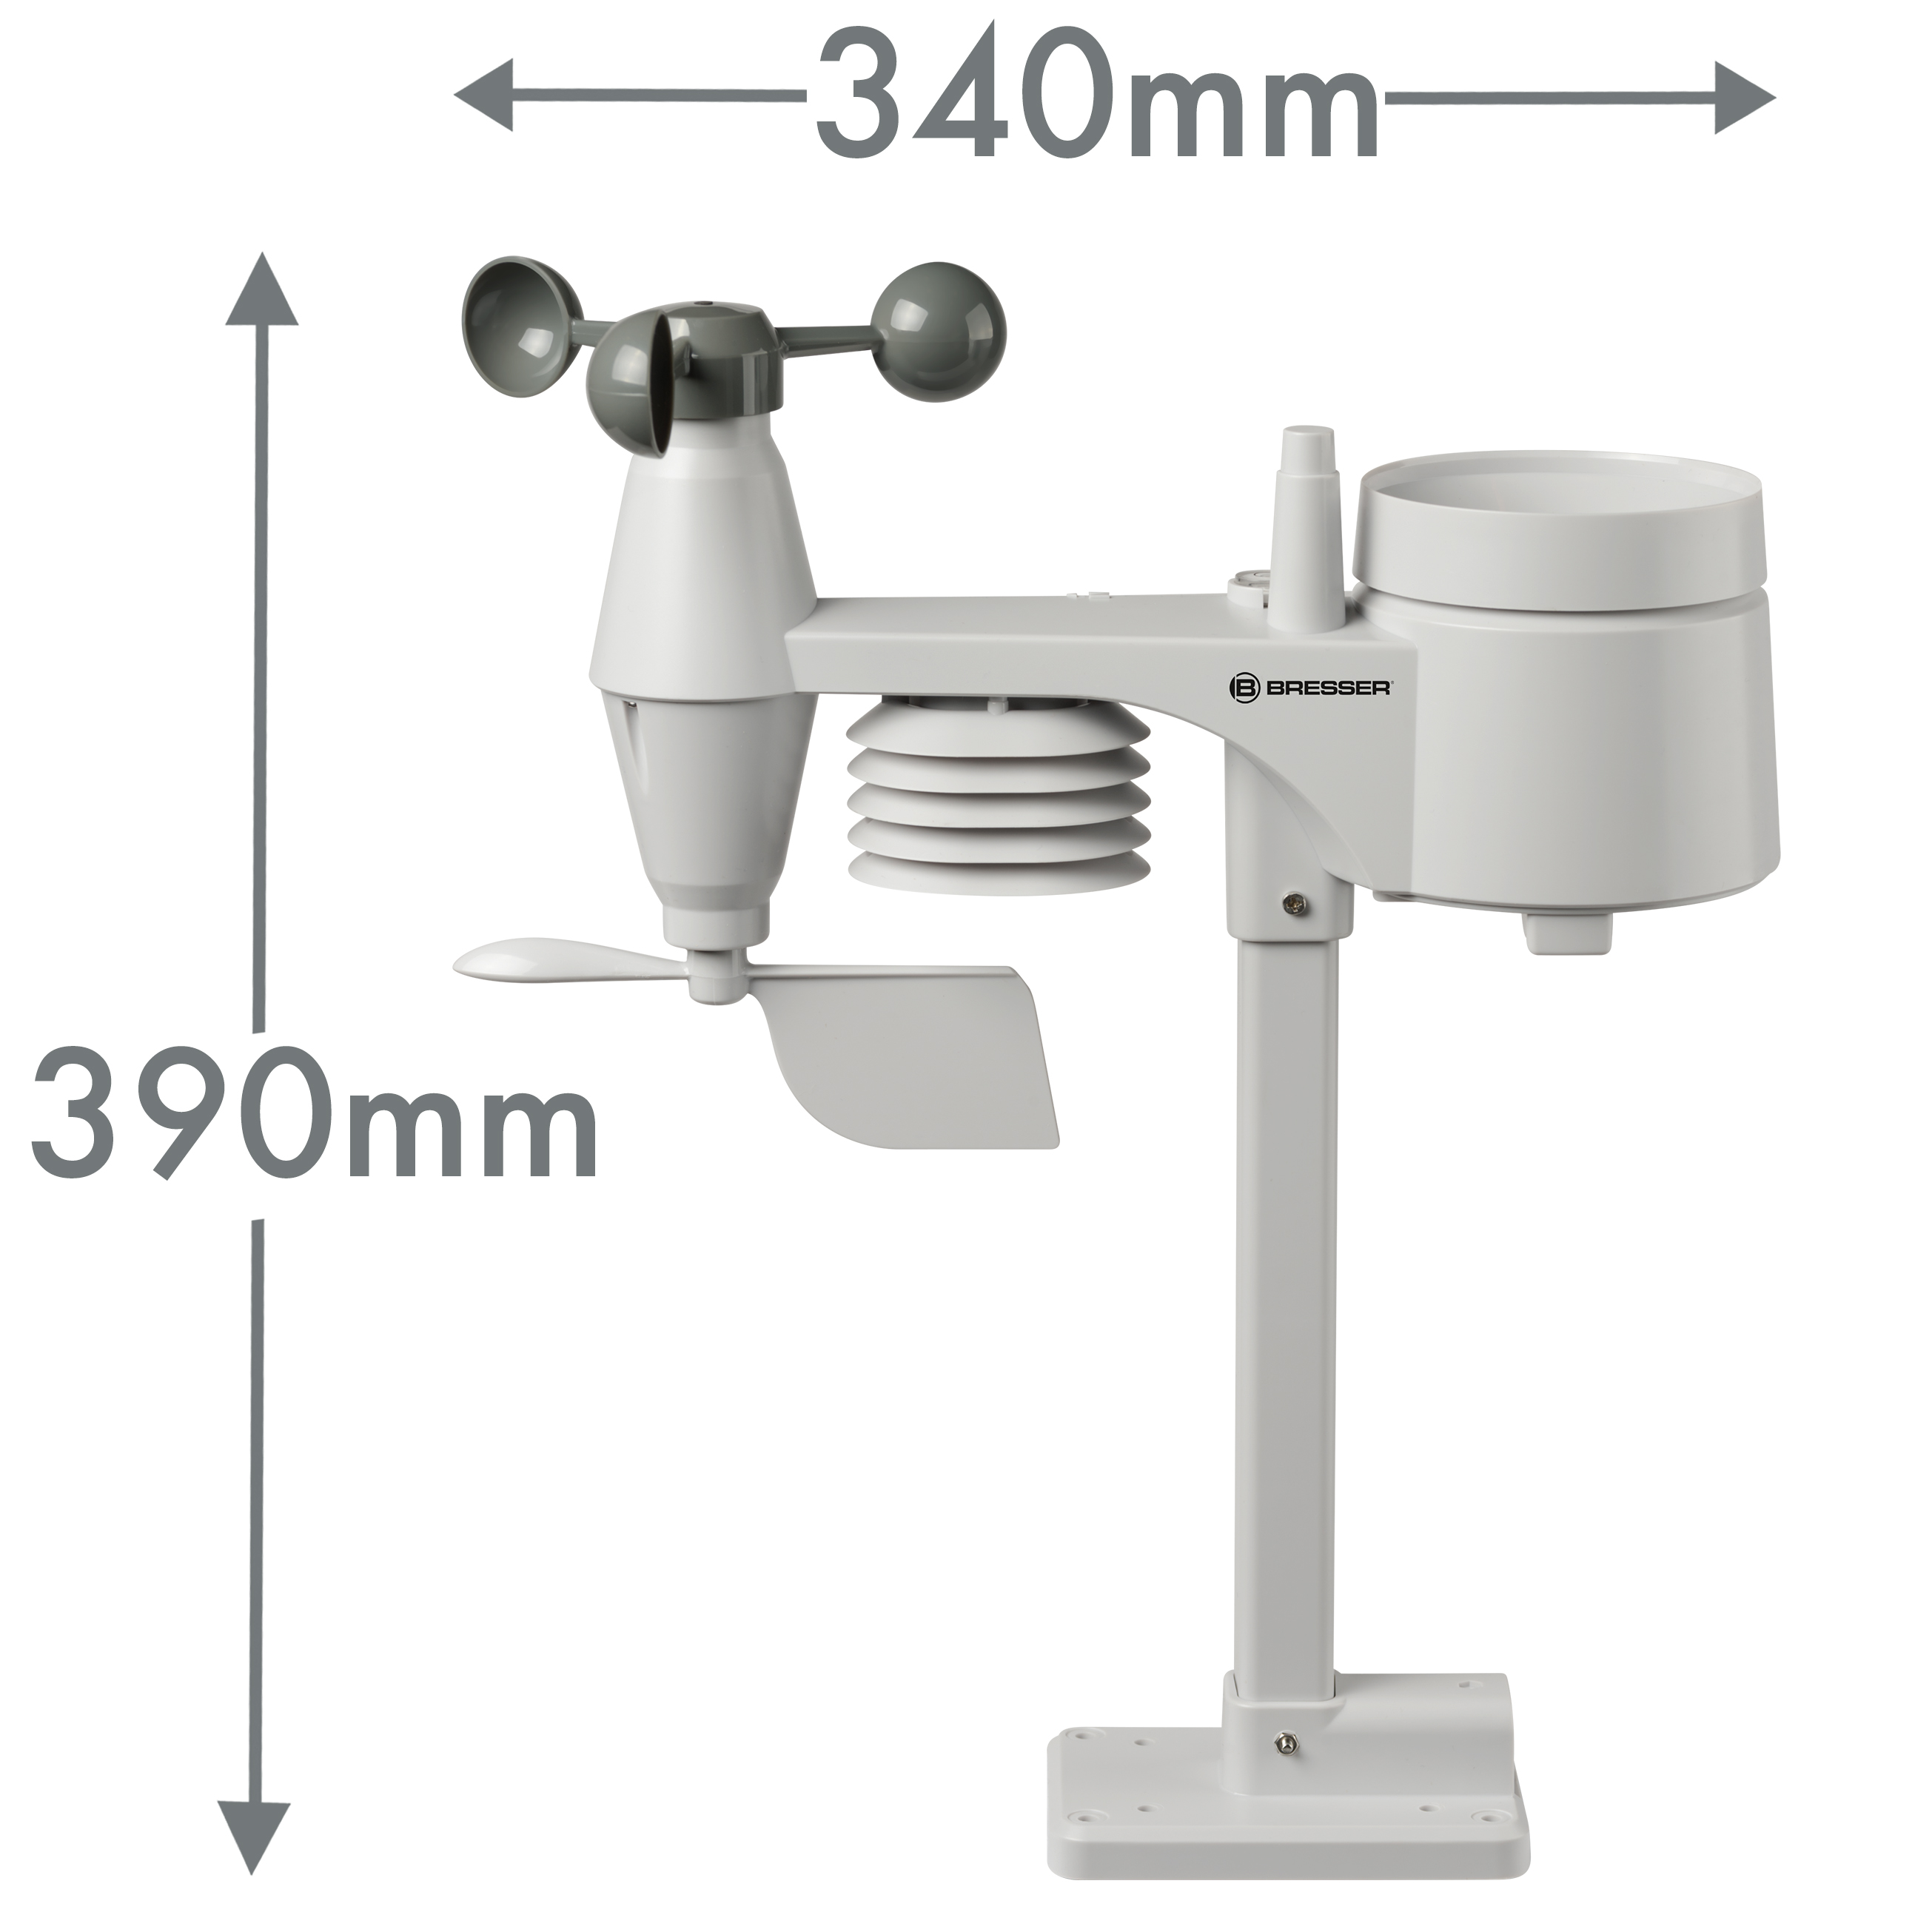 BRESSER 5-in-1 Professional Weather Station with colour change